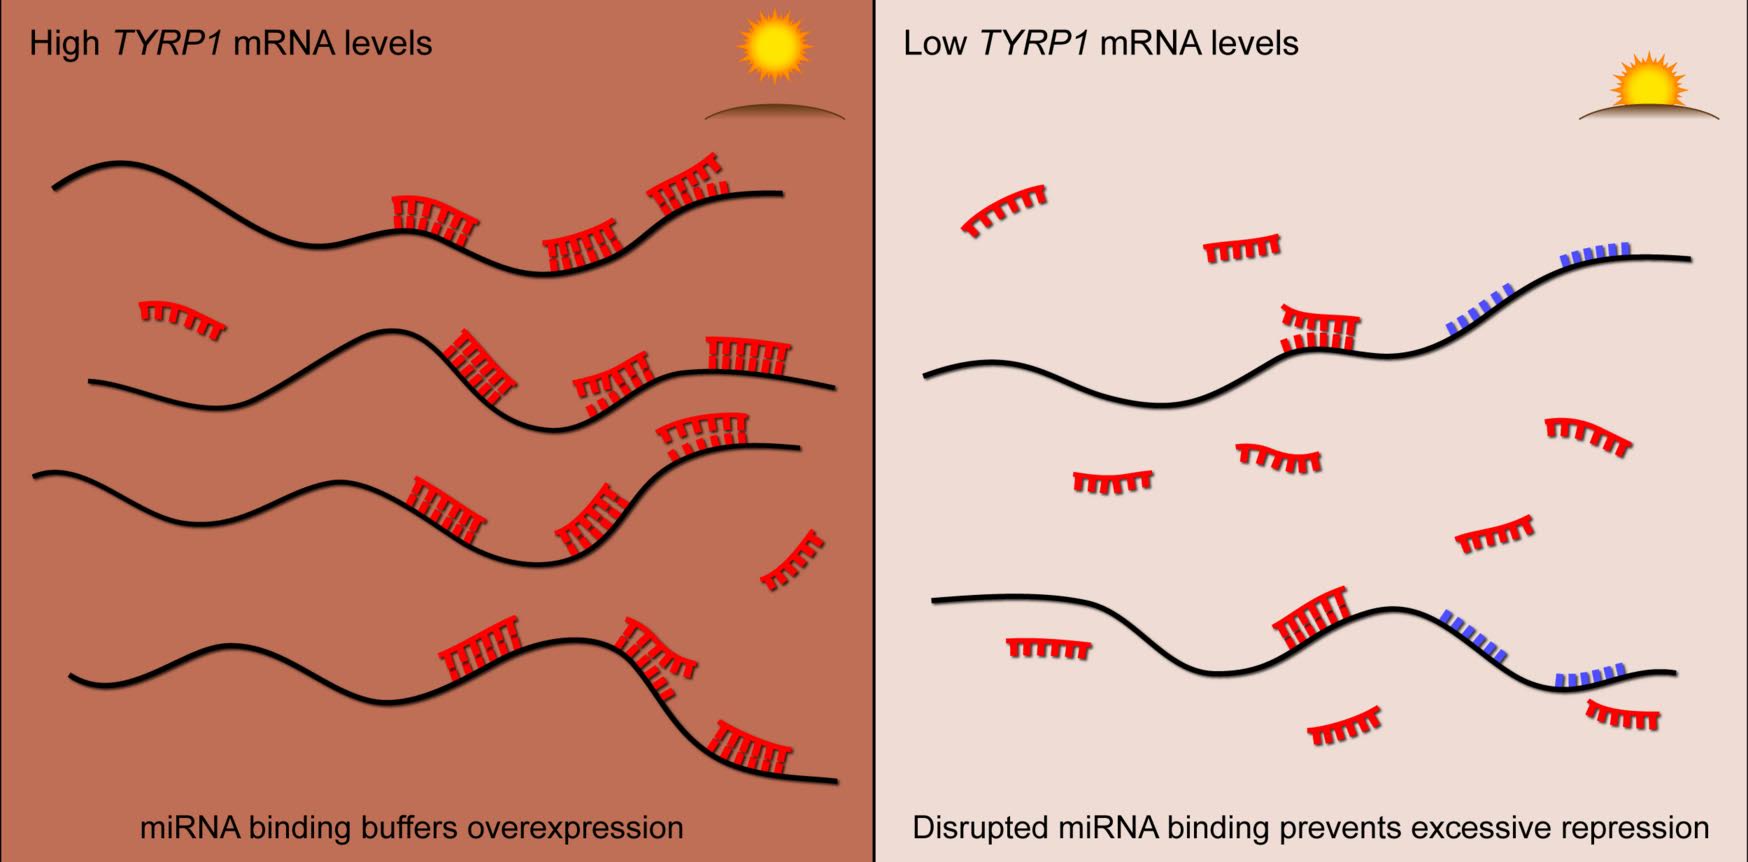 A SCHEMATIC DEMONSTRATING HOW MICRORNA BINDING CAN MODULATE GENE EXPRESSION